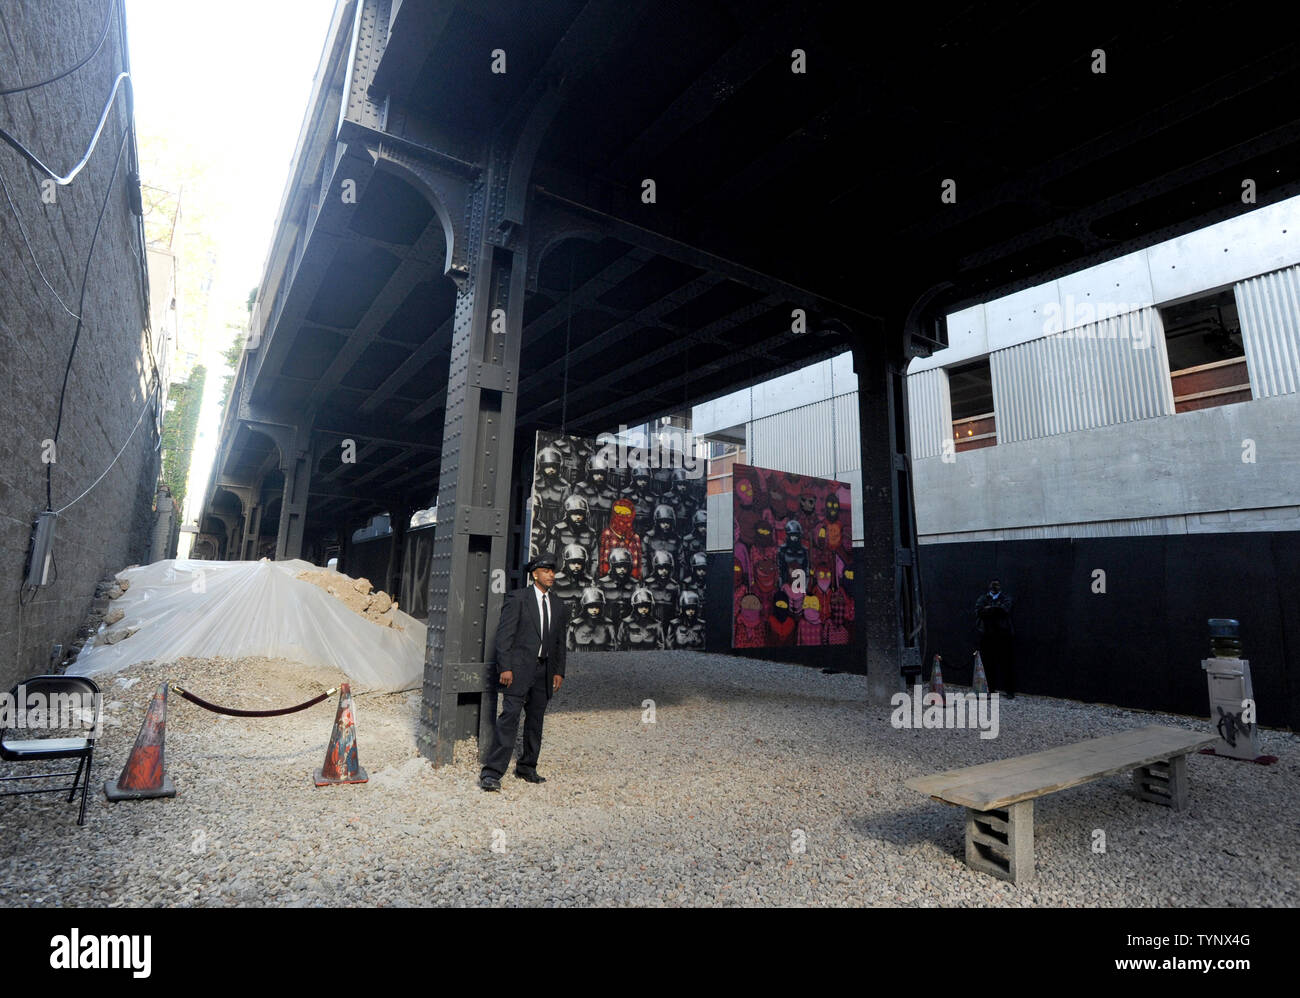 A security guard protects a temporary exhibition space with art pieces created by  British street artist Banksy on the west side of Manhattan in New York City on October 18, 2013. Banksy is a pseudonymous England-based graffiti artist, political activist, film director, and painter. His satirical street art and subversive epigrams combine dark humor with graffiti done in a distinctive stenciling technique.    UPI/Dennis Van Tine Stock Photo